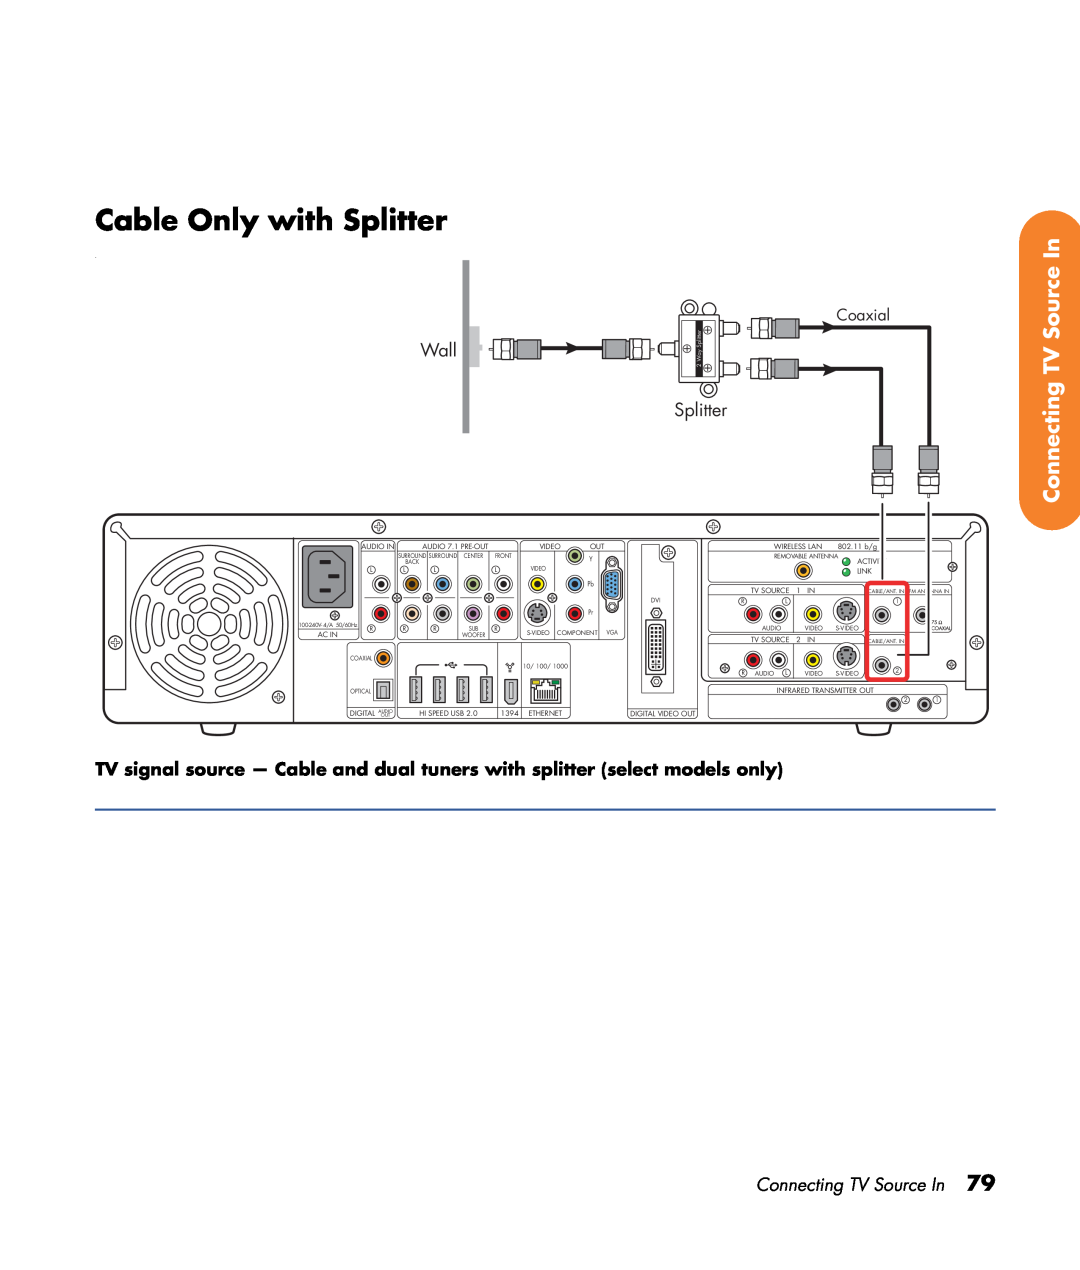 HP z557, z555, z552, z545, z540 manual Cable Only with Splitter, Connecting TV Source In, Wall, Coaxial 